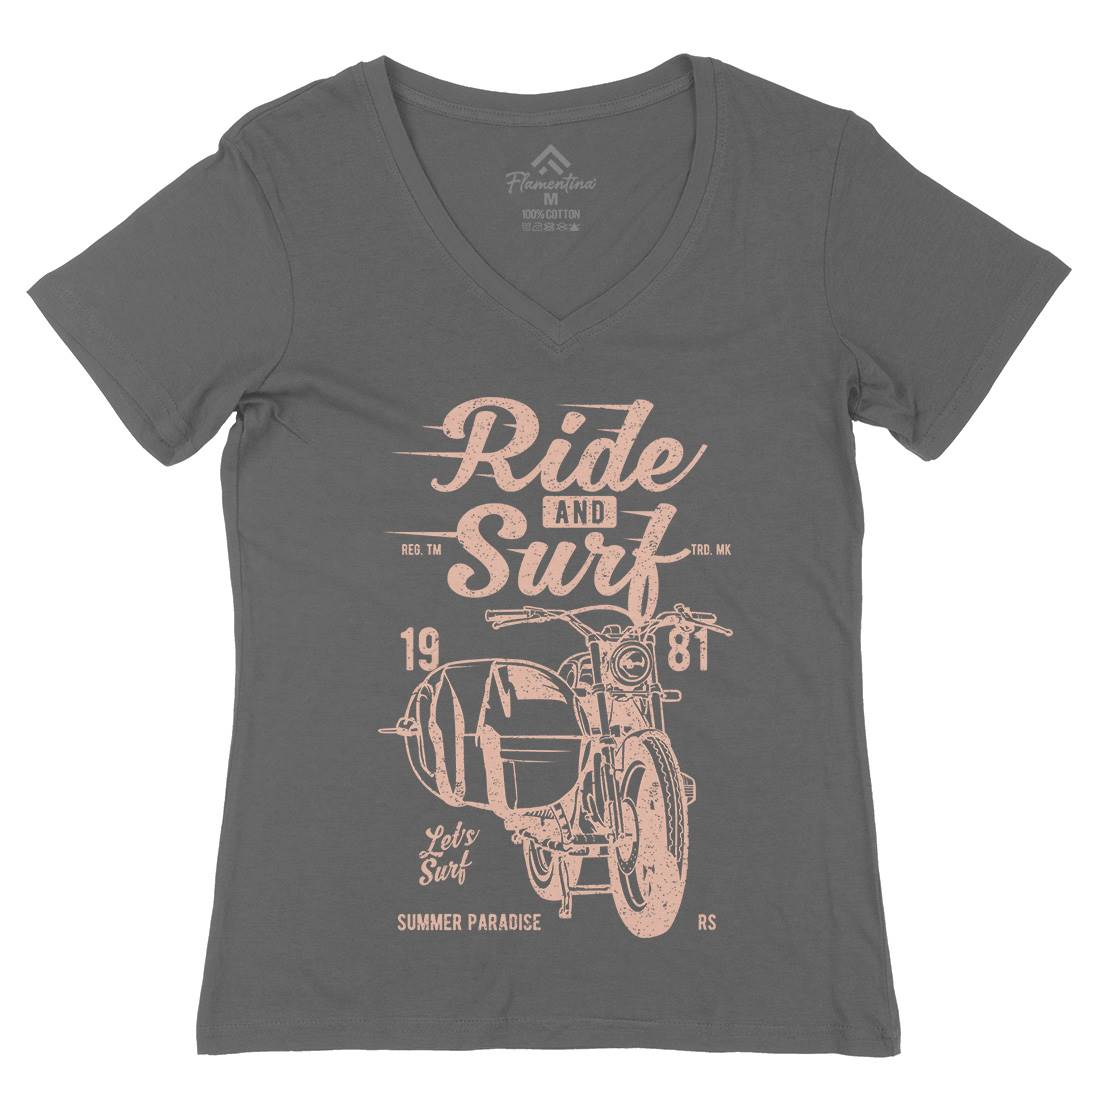 Ride And Womens Organic V-Neck T-Shirt Surf A742